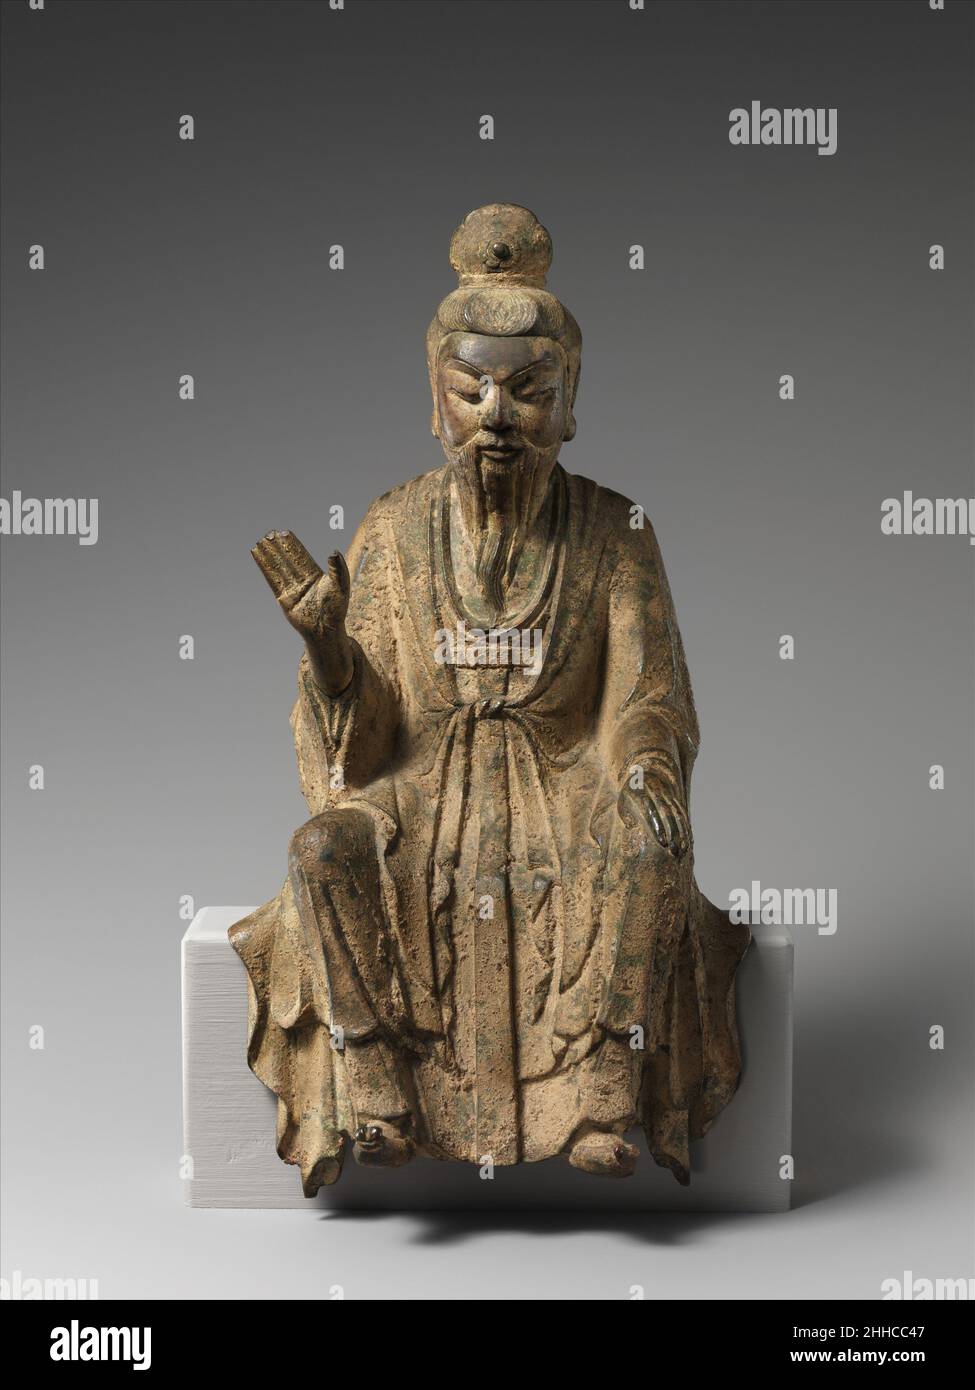 Daoist Immortal, probably Laozi (??) 10th century China This sculpture epitomizes the merging of religious and secular imagery in later Chinese Buddhist sculpture. With his shaven head and elongated earlobes, the figure resembles a luohan (one of the Indian disciples of the Buddha), but his refined facial features, dignified posture, long-sleeved robe, and pointed shoes—all attributes associated with Confucian scholar-officials—identify him unmistakably as a youthful monk.The sculpture’s tendency toward abstraction and stylization—the contours of the head, body, and robes are conveyed through Stock Photo